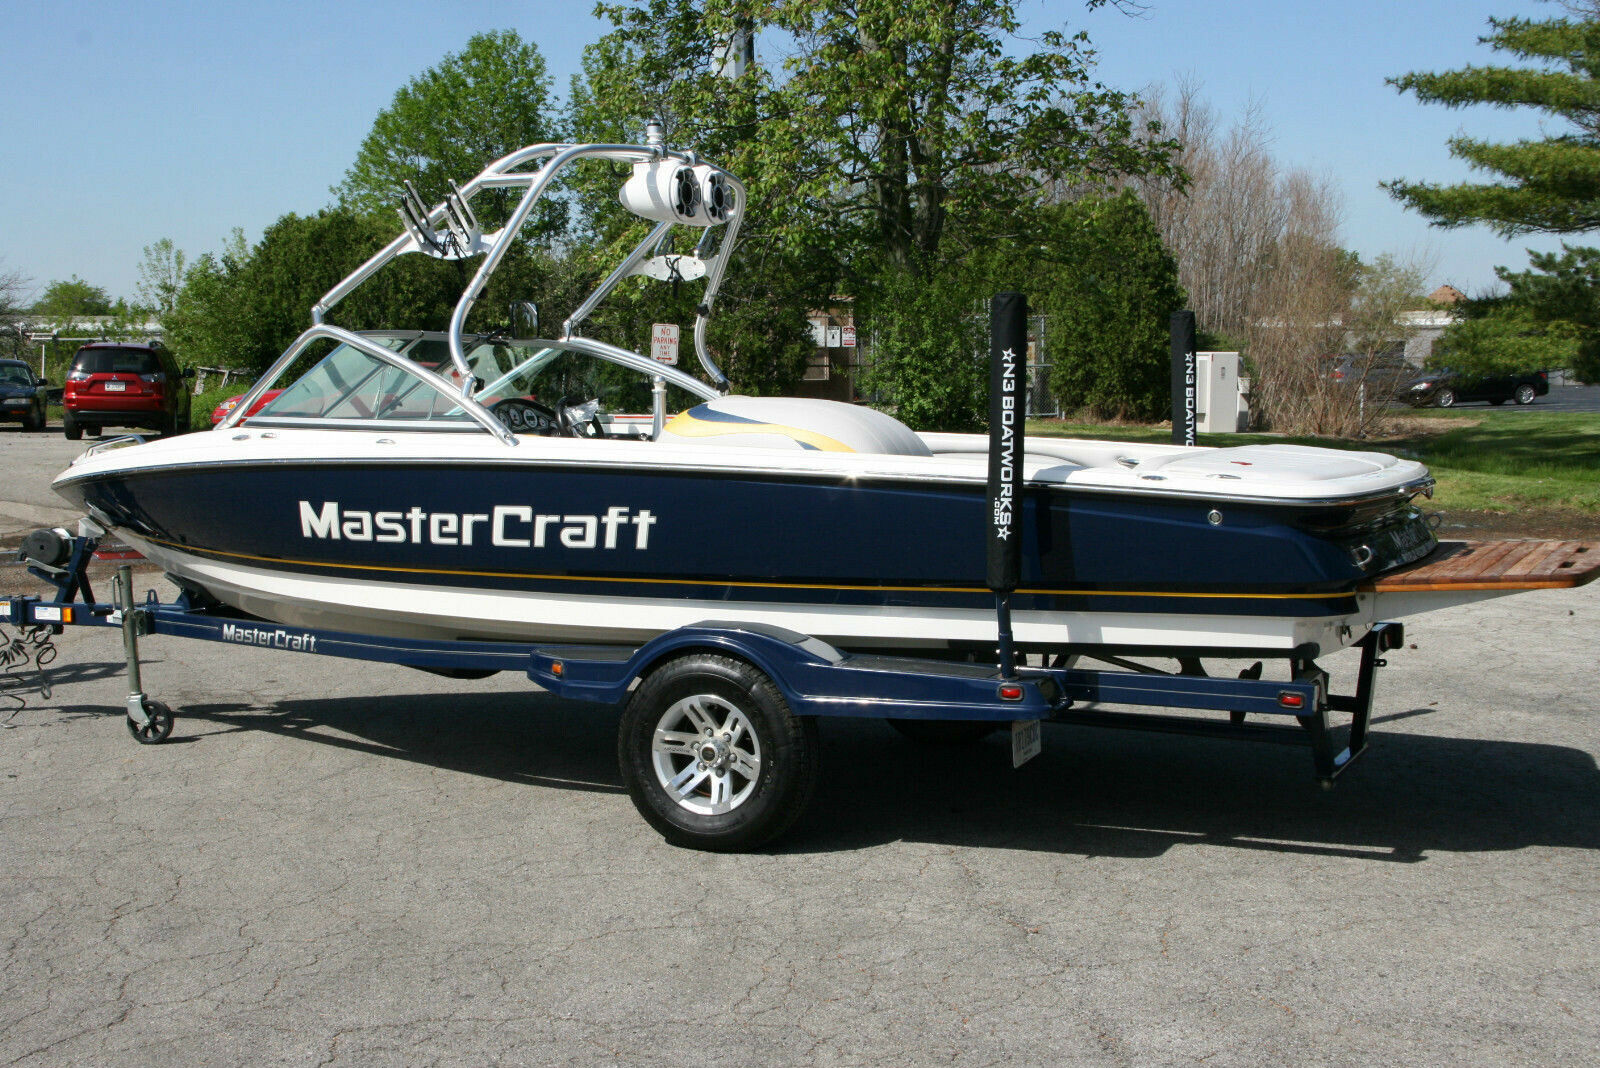 Mastercraft ProStar 197 2009 for sale for $9,500 - Boats-from-USA.com